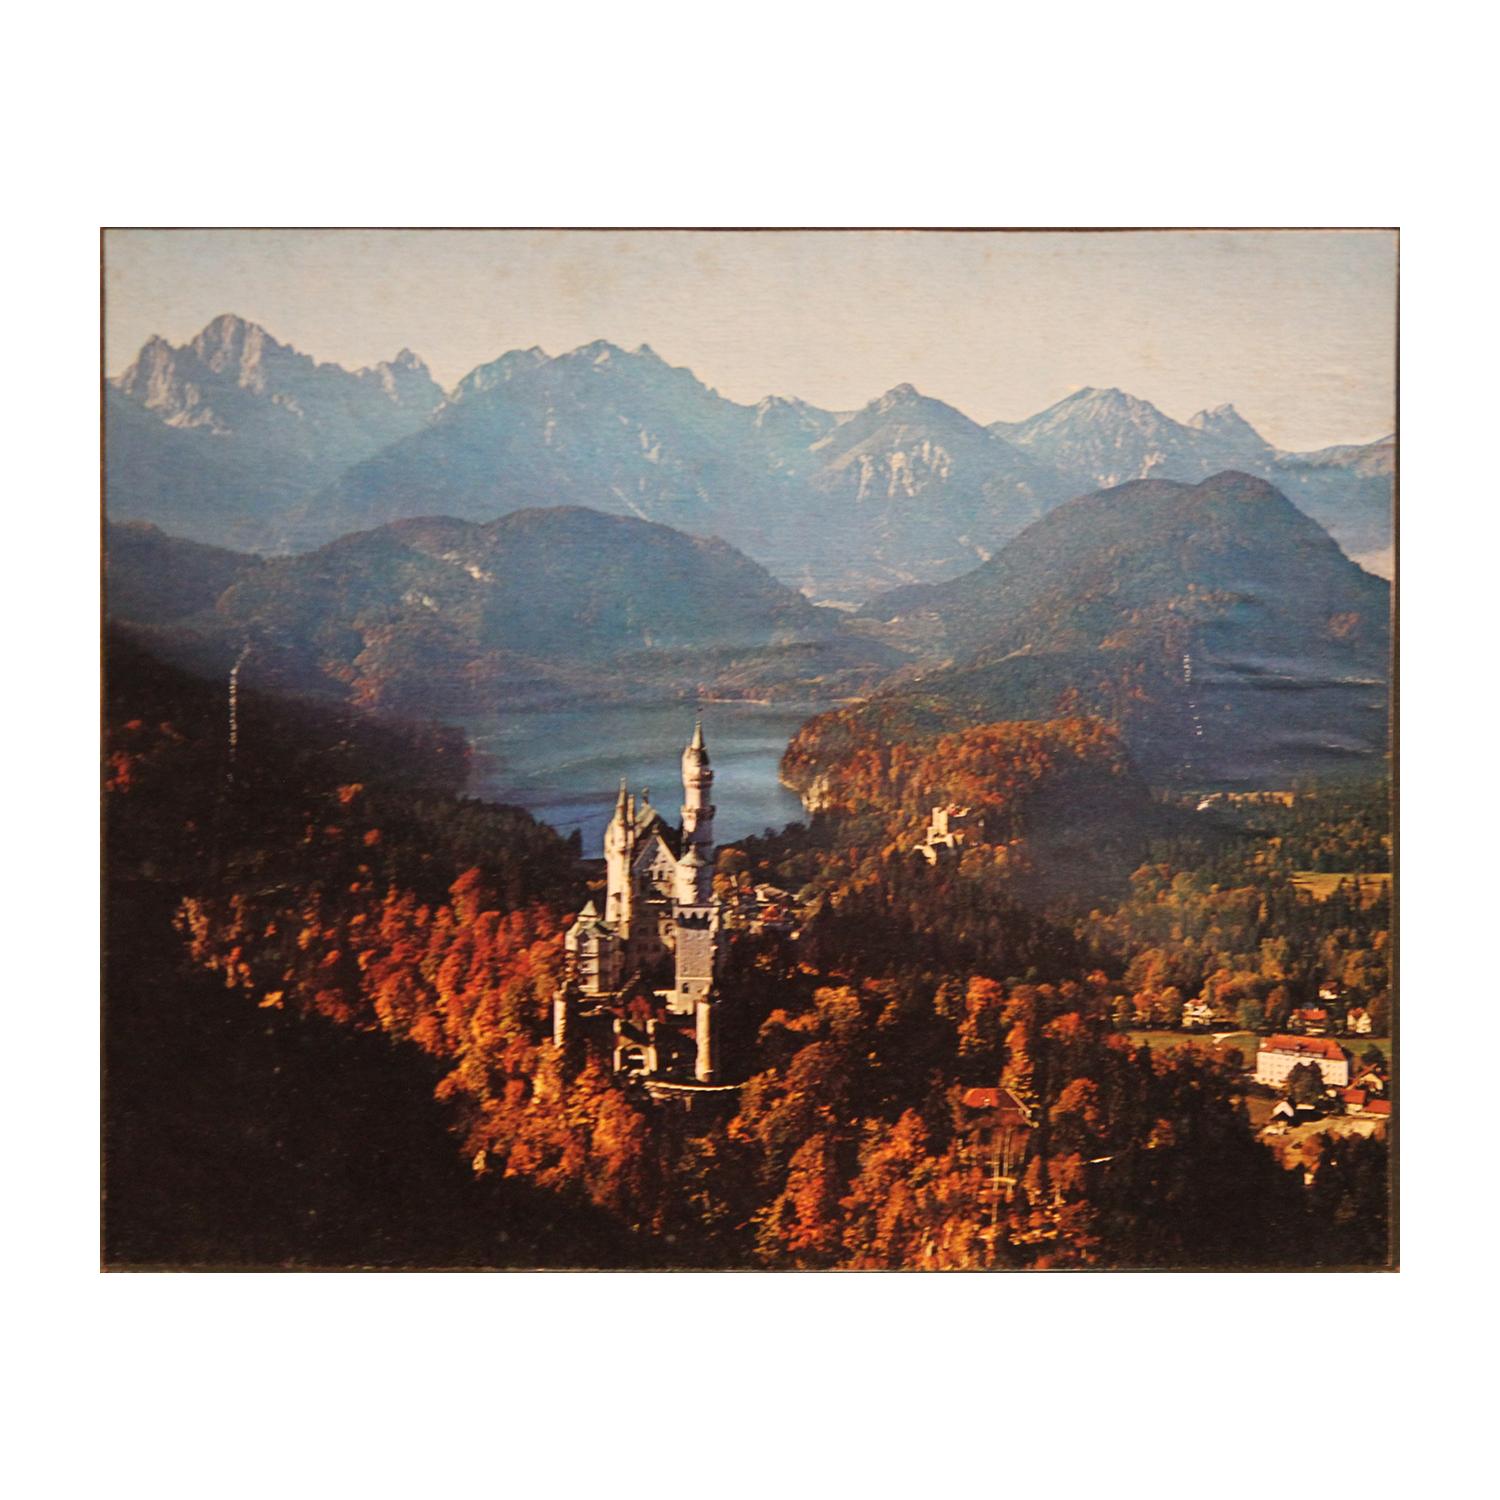 Neuschwanstein Castle in the Forrest Bavaria Germany Colored Photograph